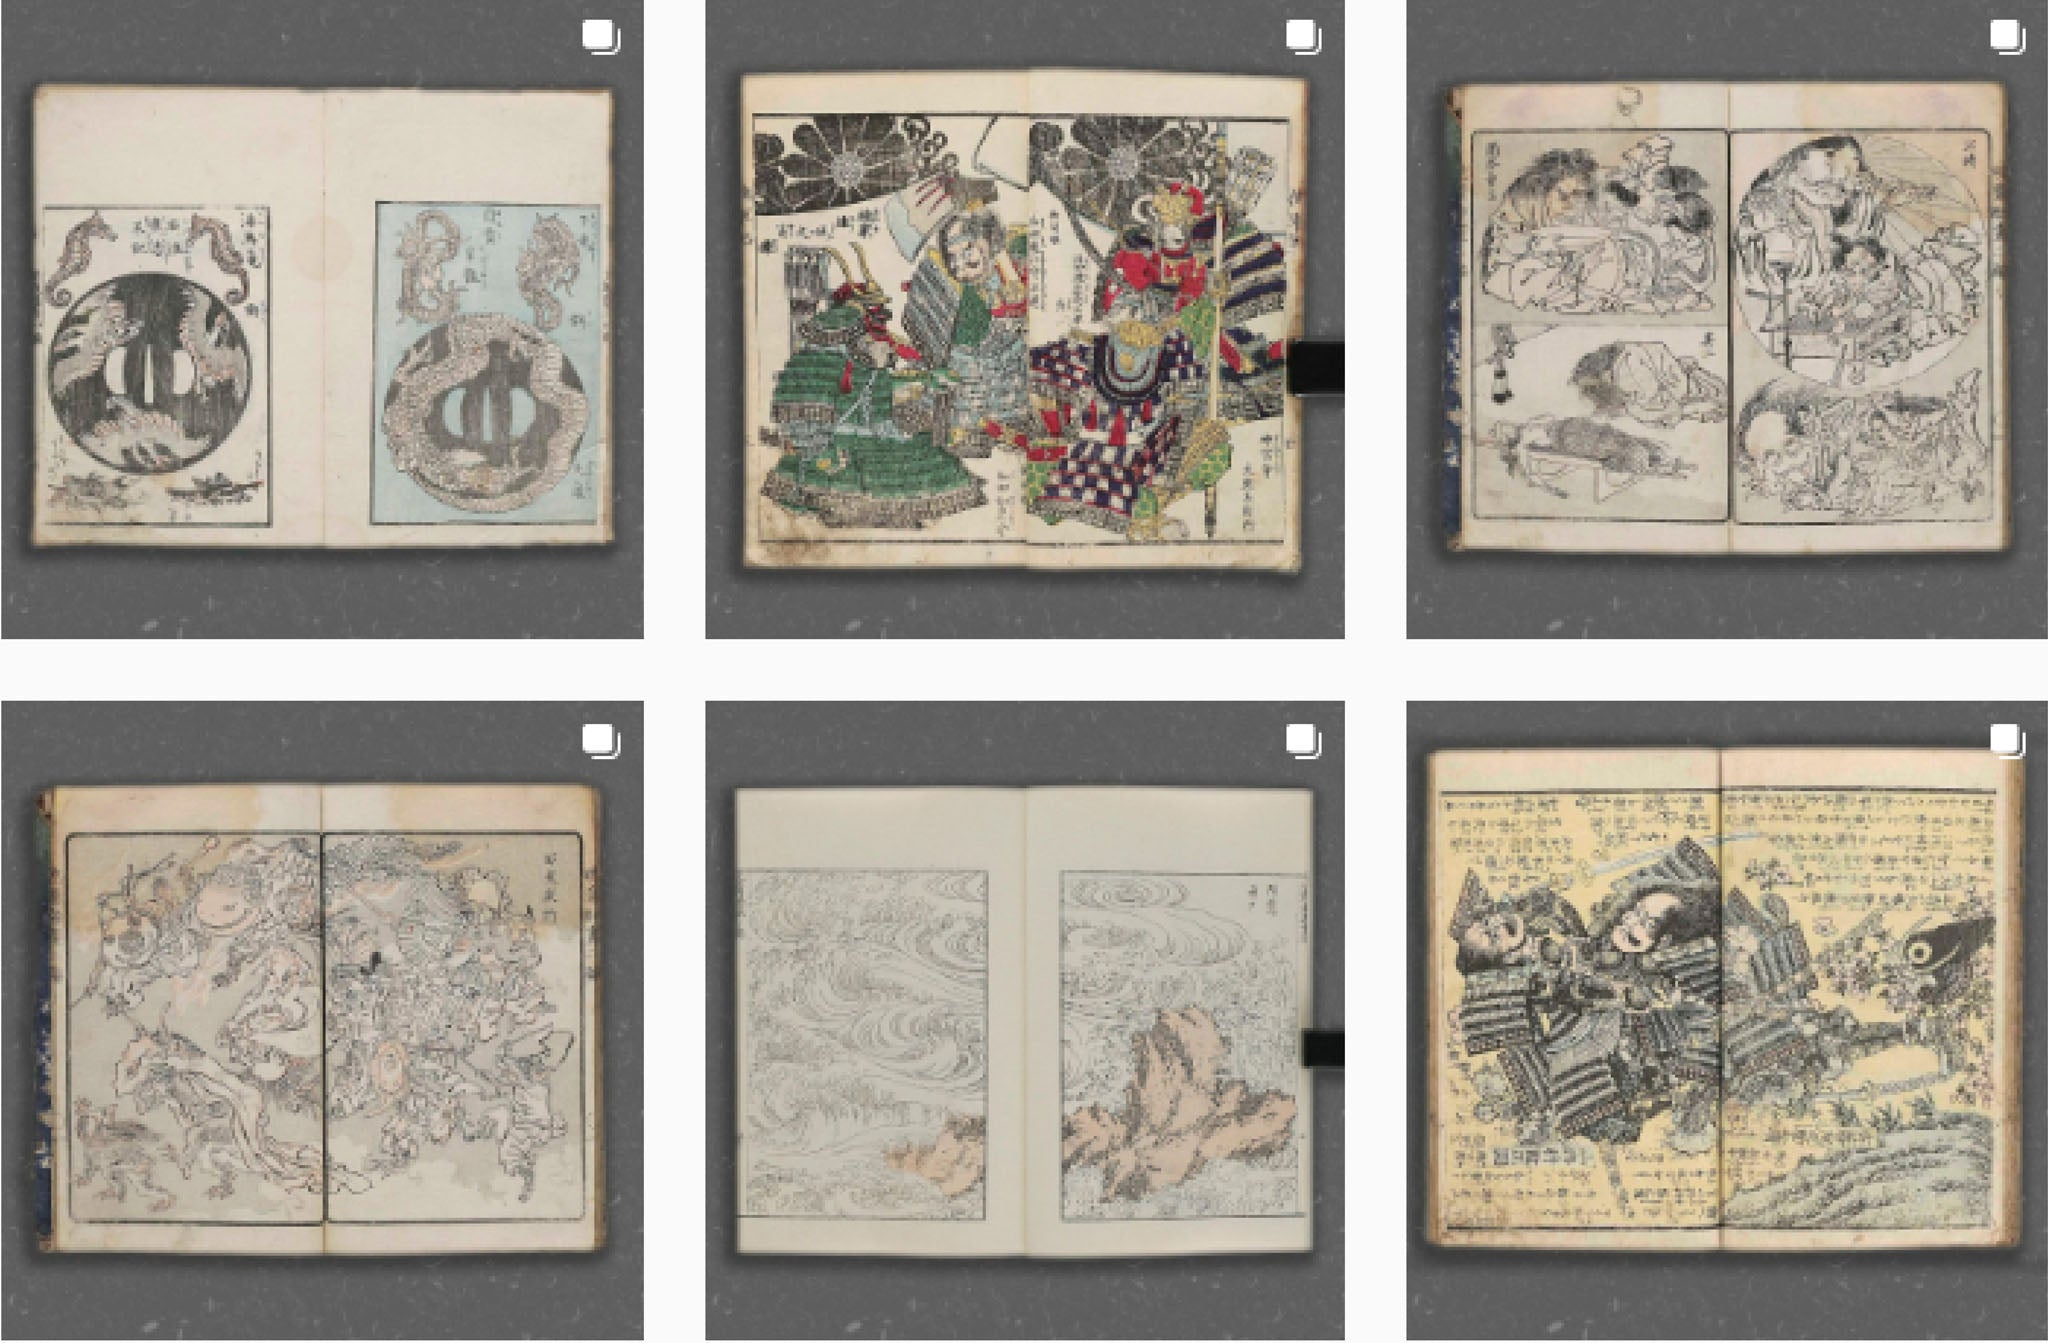 Instagram page for Nihon Kosho, a online purveyor of antique Japanese books and prints